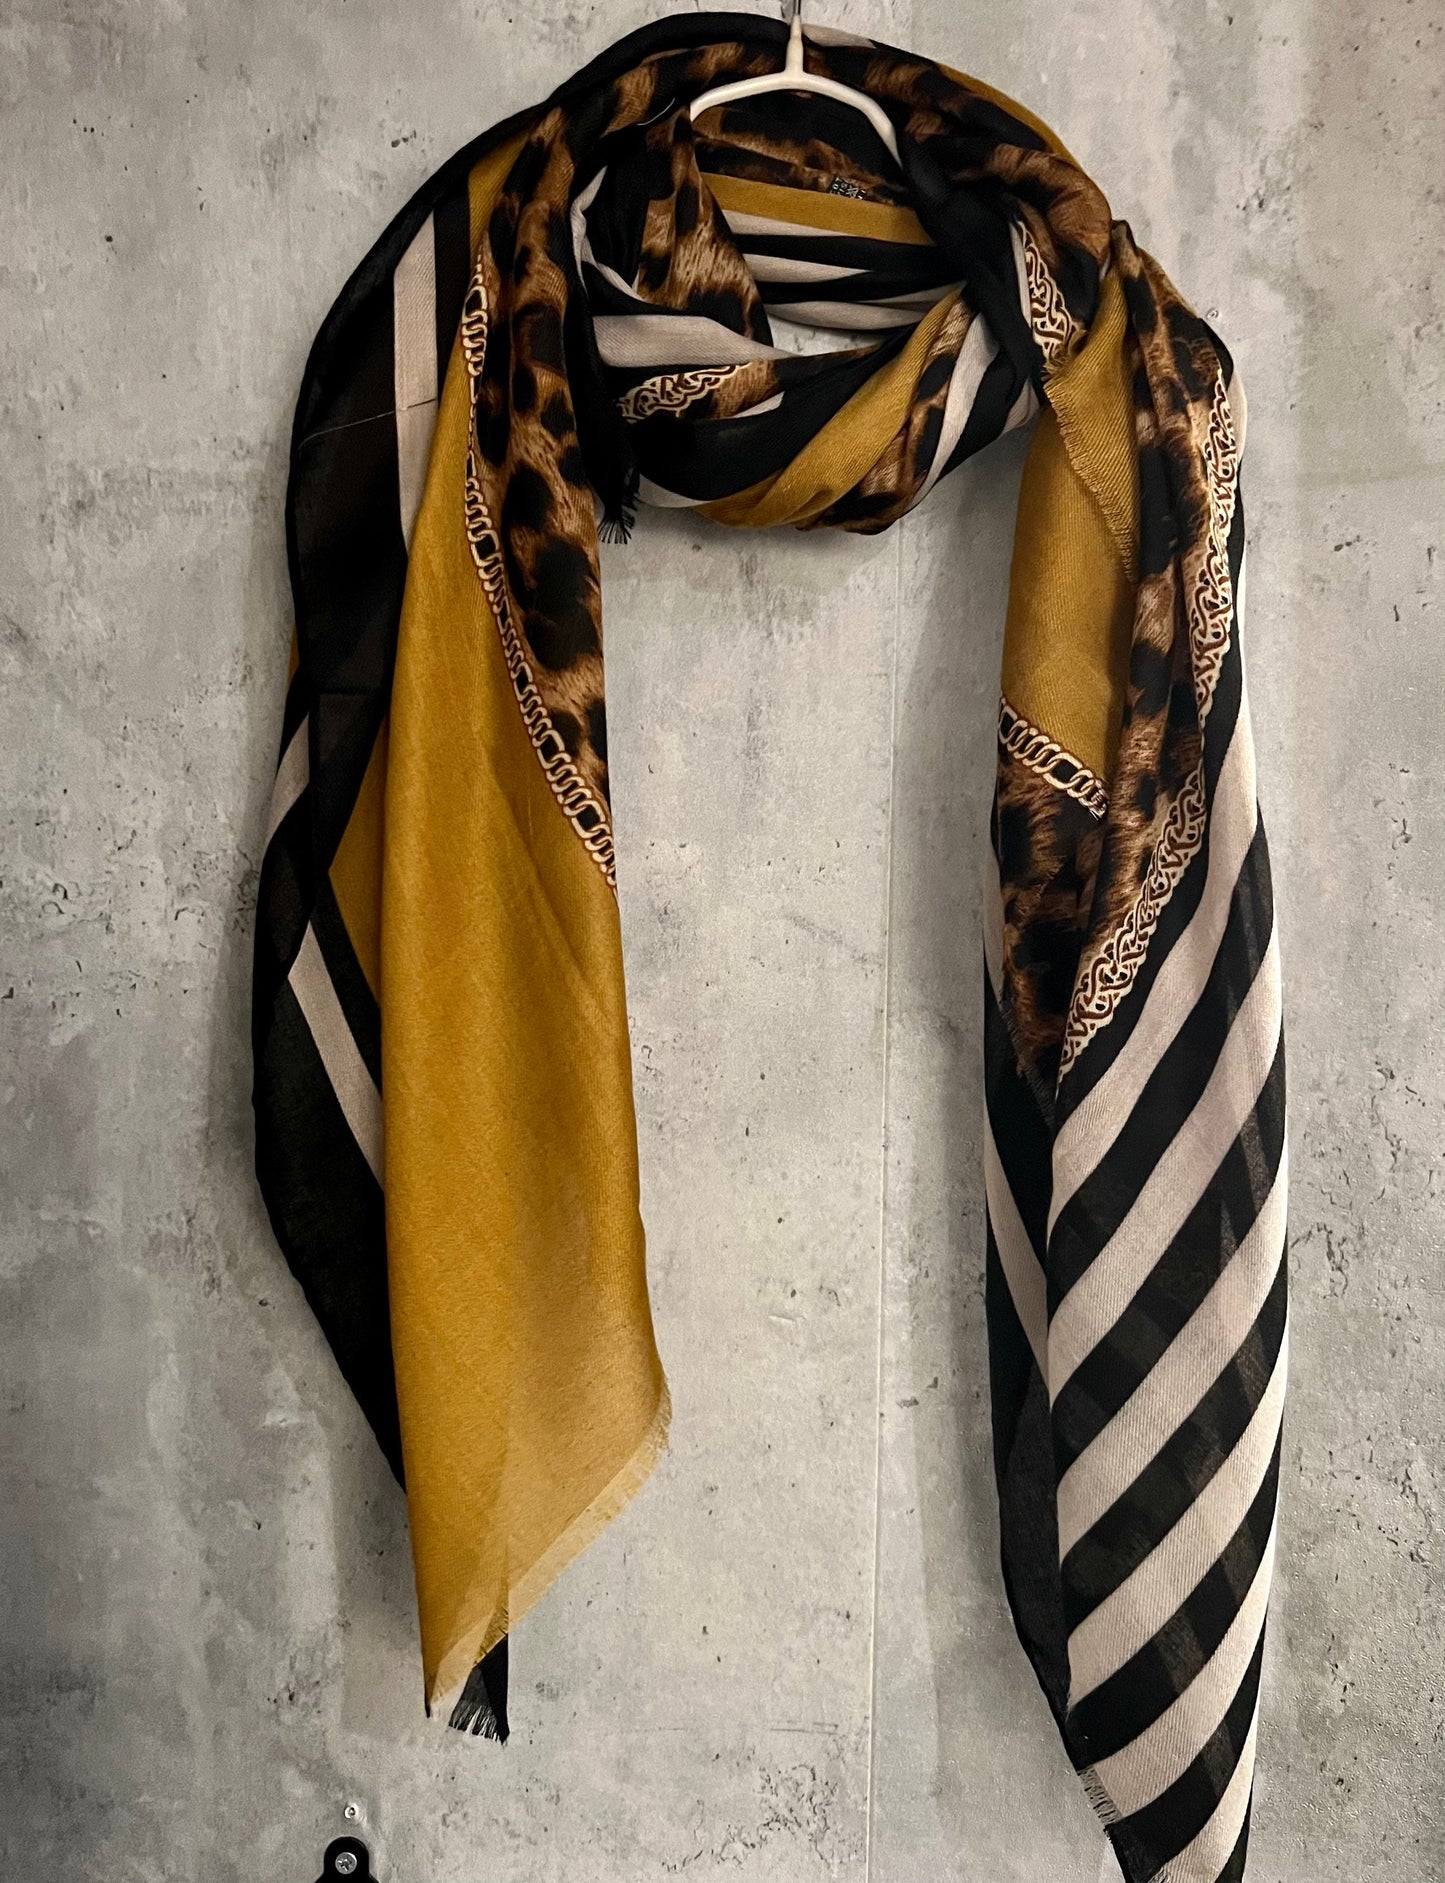 Leopard X Lines Pattern Mustard Yellow Cotton Scarf/Summer Autumn Women Scarf/Gifts For Her Birthday Christmas/UK Seller